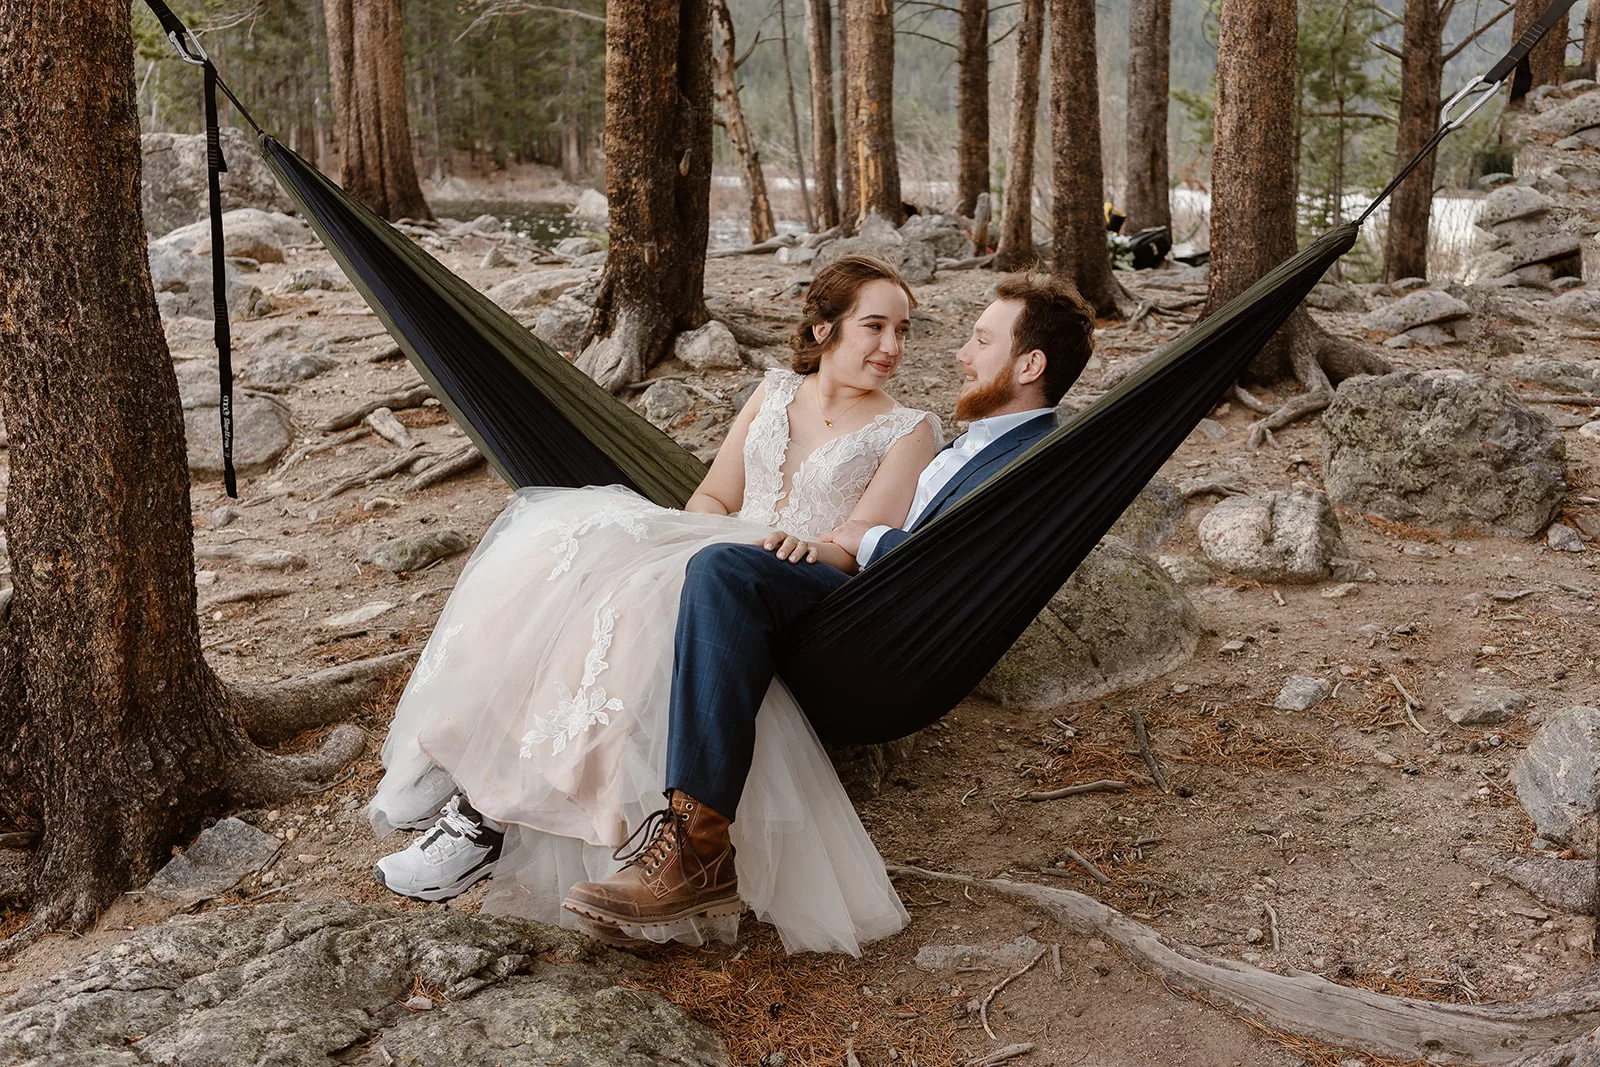 A bride and groom share a stress-free moment in a hammock during their adventure elopement, a moment their wedding coordinator helped them plan.